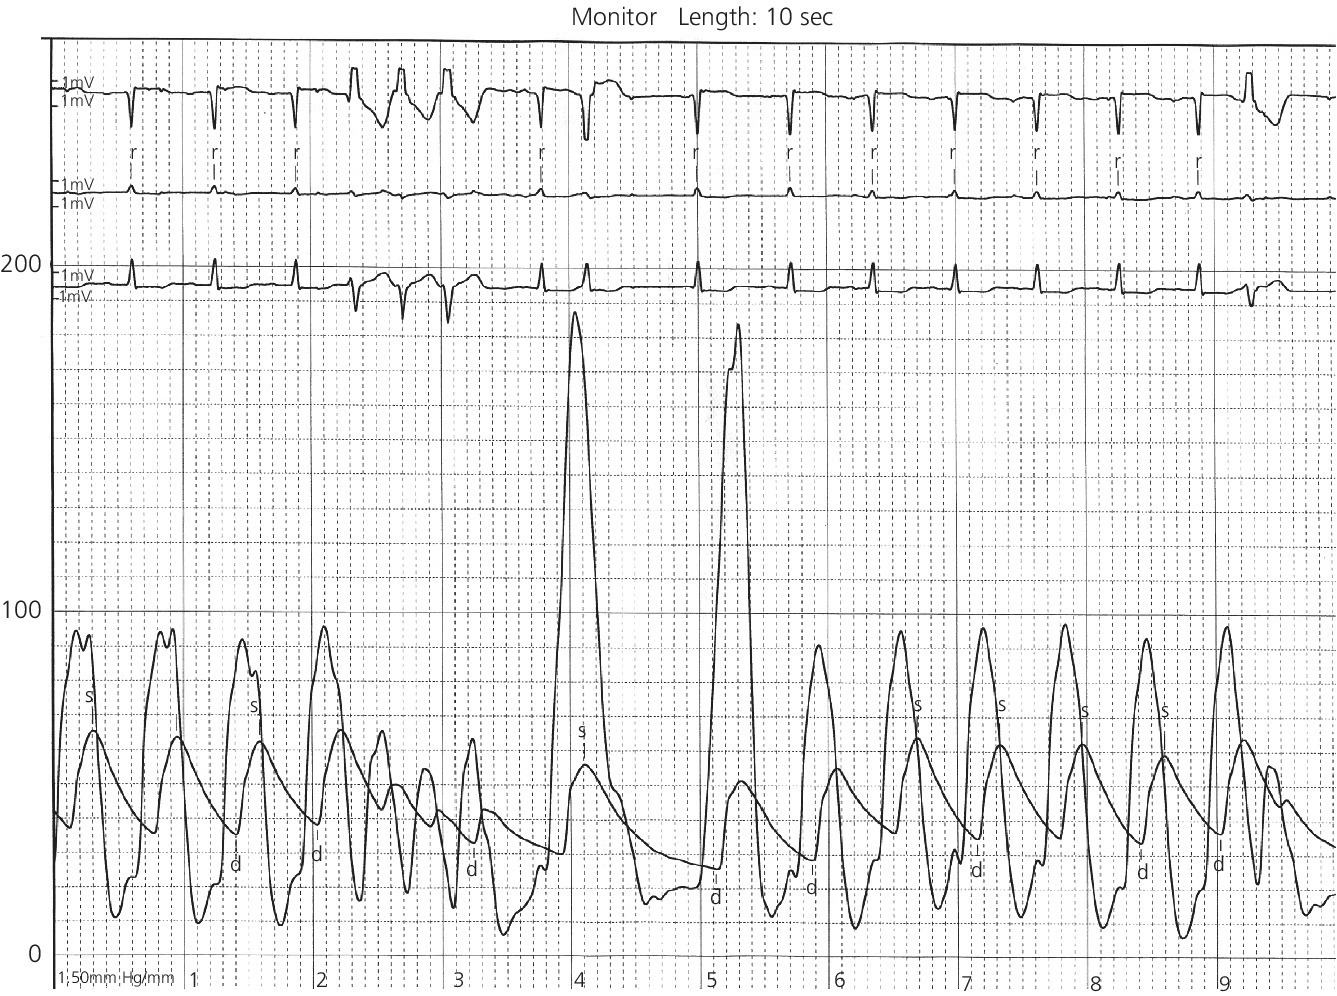 Electrocardiogram demonstrating provocable gradient with PVCs during administration of amyl nitrate.